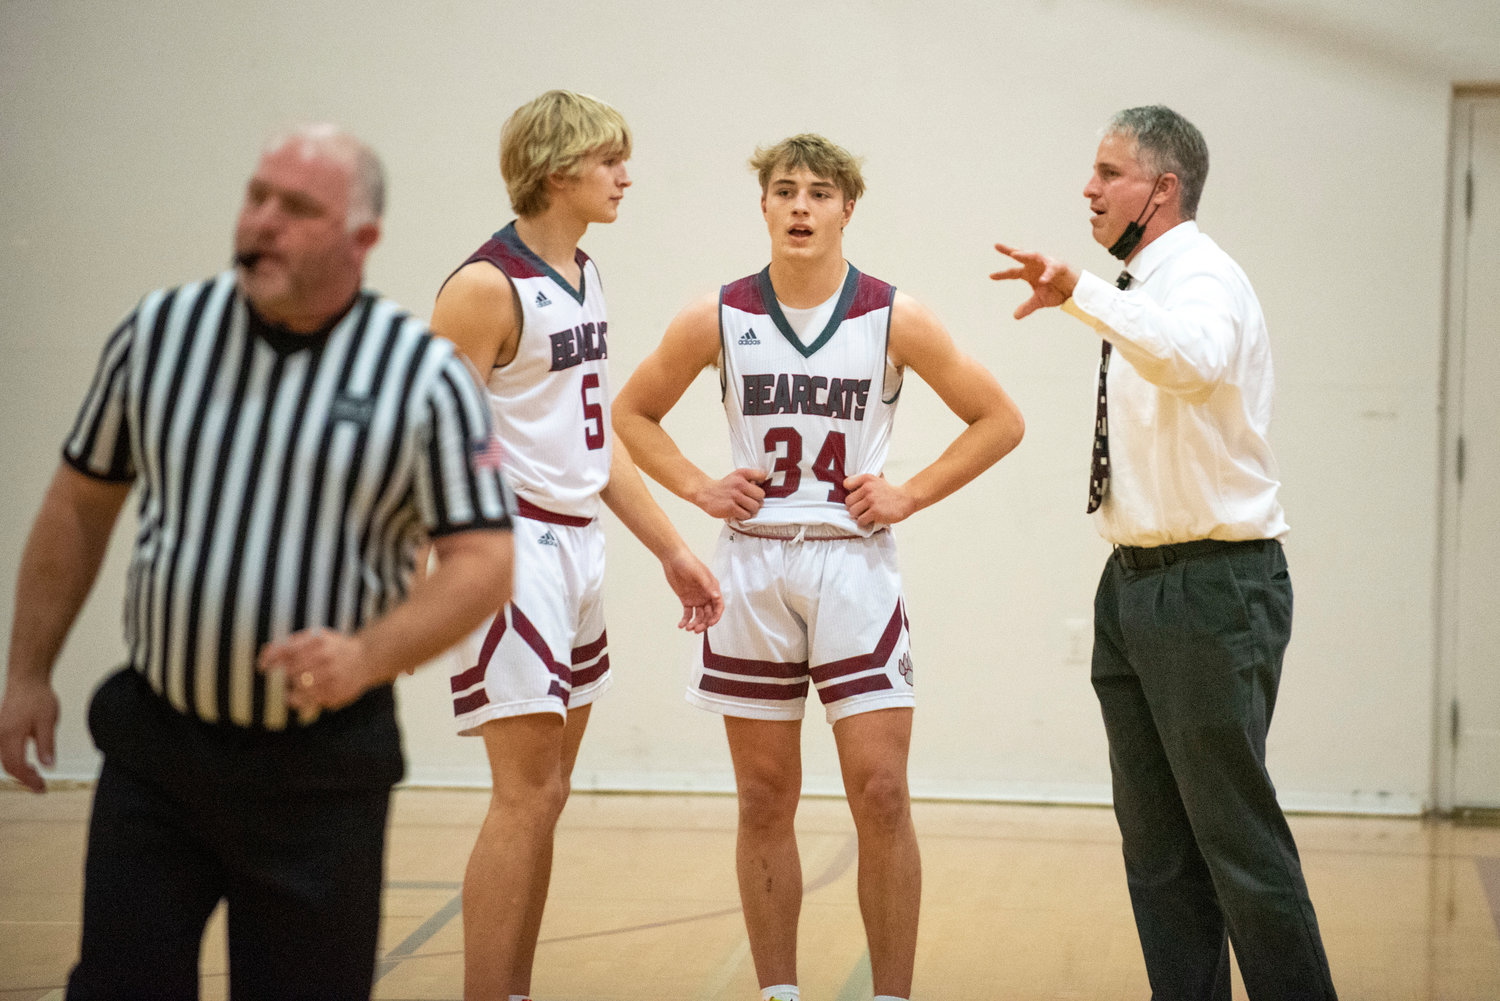 W.F. West coach Chris White, right, talks with Gage Brumfield (34) and Dirk Plakinger during free throws against Shelton on Dec. 8.